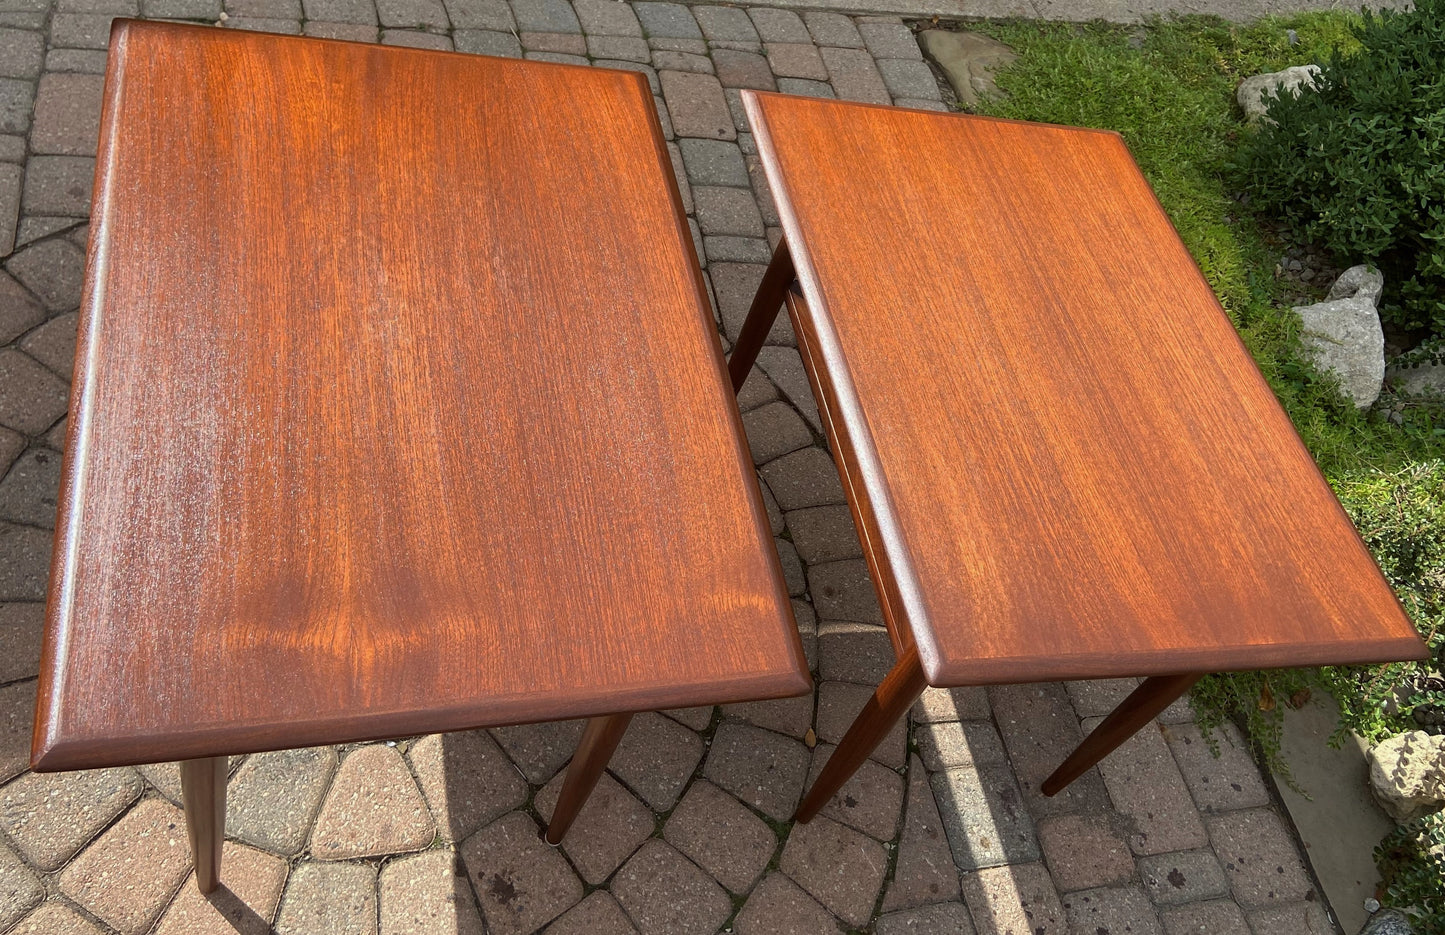 REFINISHED Mid Century Modern Teak Accent Tables with Shelves by RS Associates